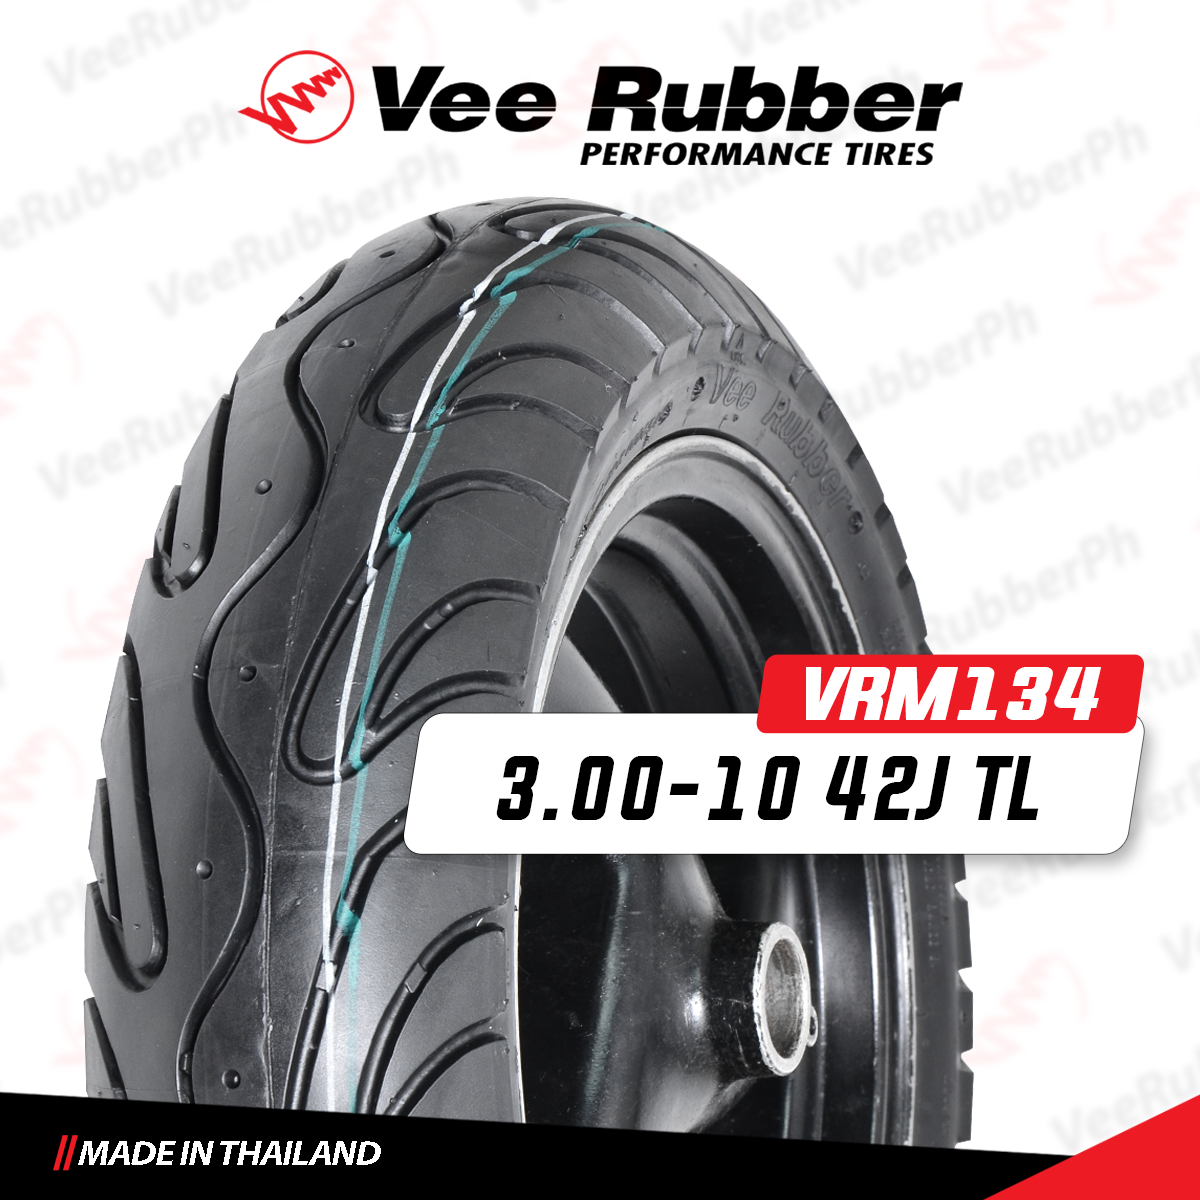 3.00-10 VRM134 (TL) VEE RUBBER 3.00 - 10 Tubeless Scooter Tires